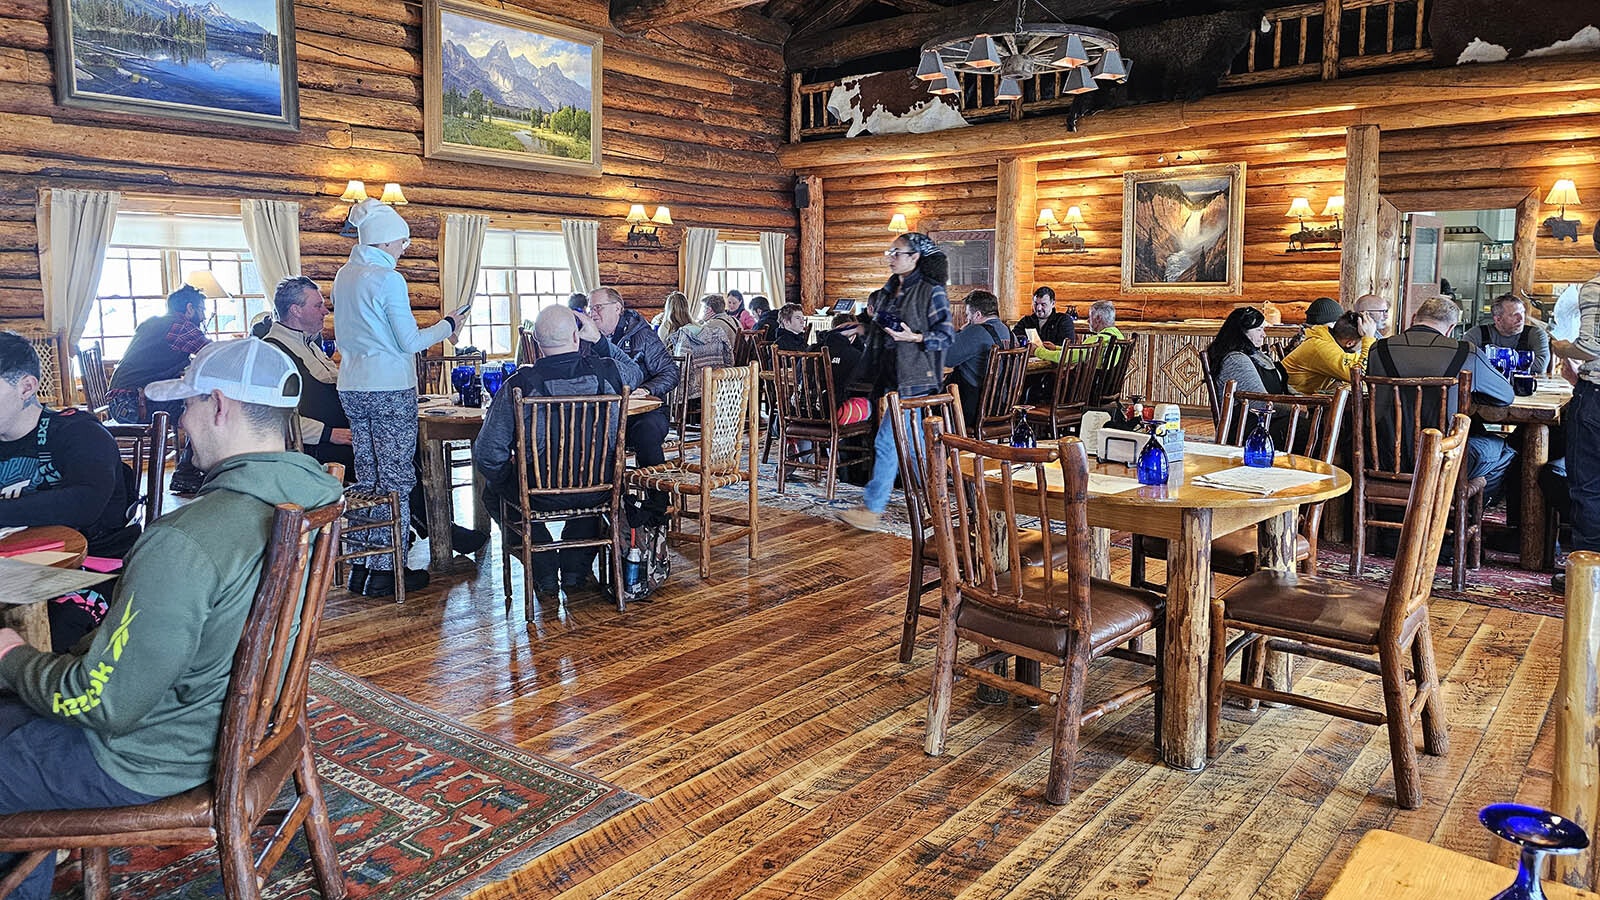 The dining hall fills up quickly for the lunch hour with snowmobilers from all over the mountain coasting in to try epic sandwiches and salads prepared by a gourmet chef.